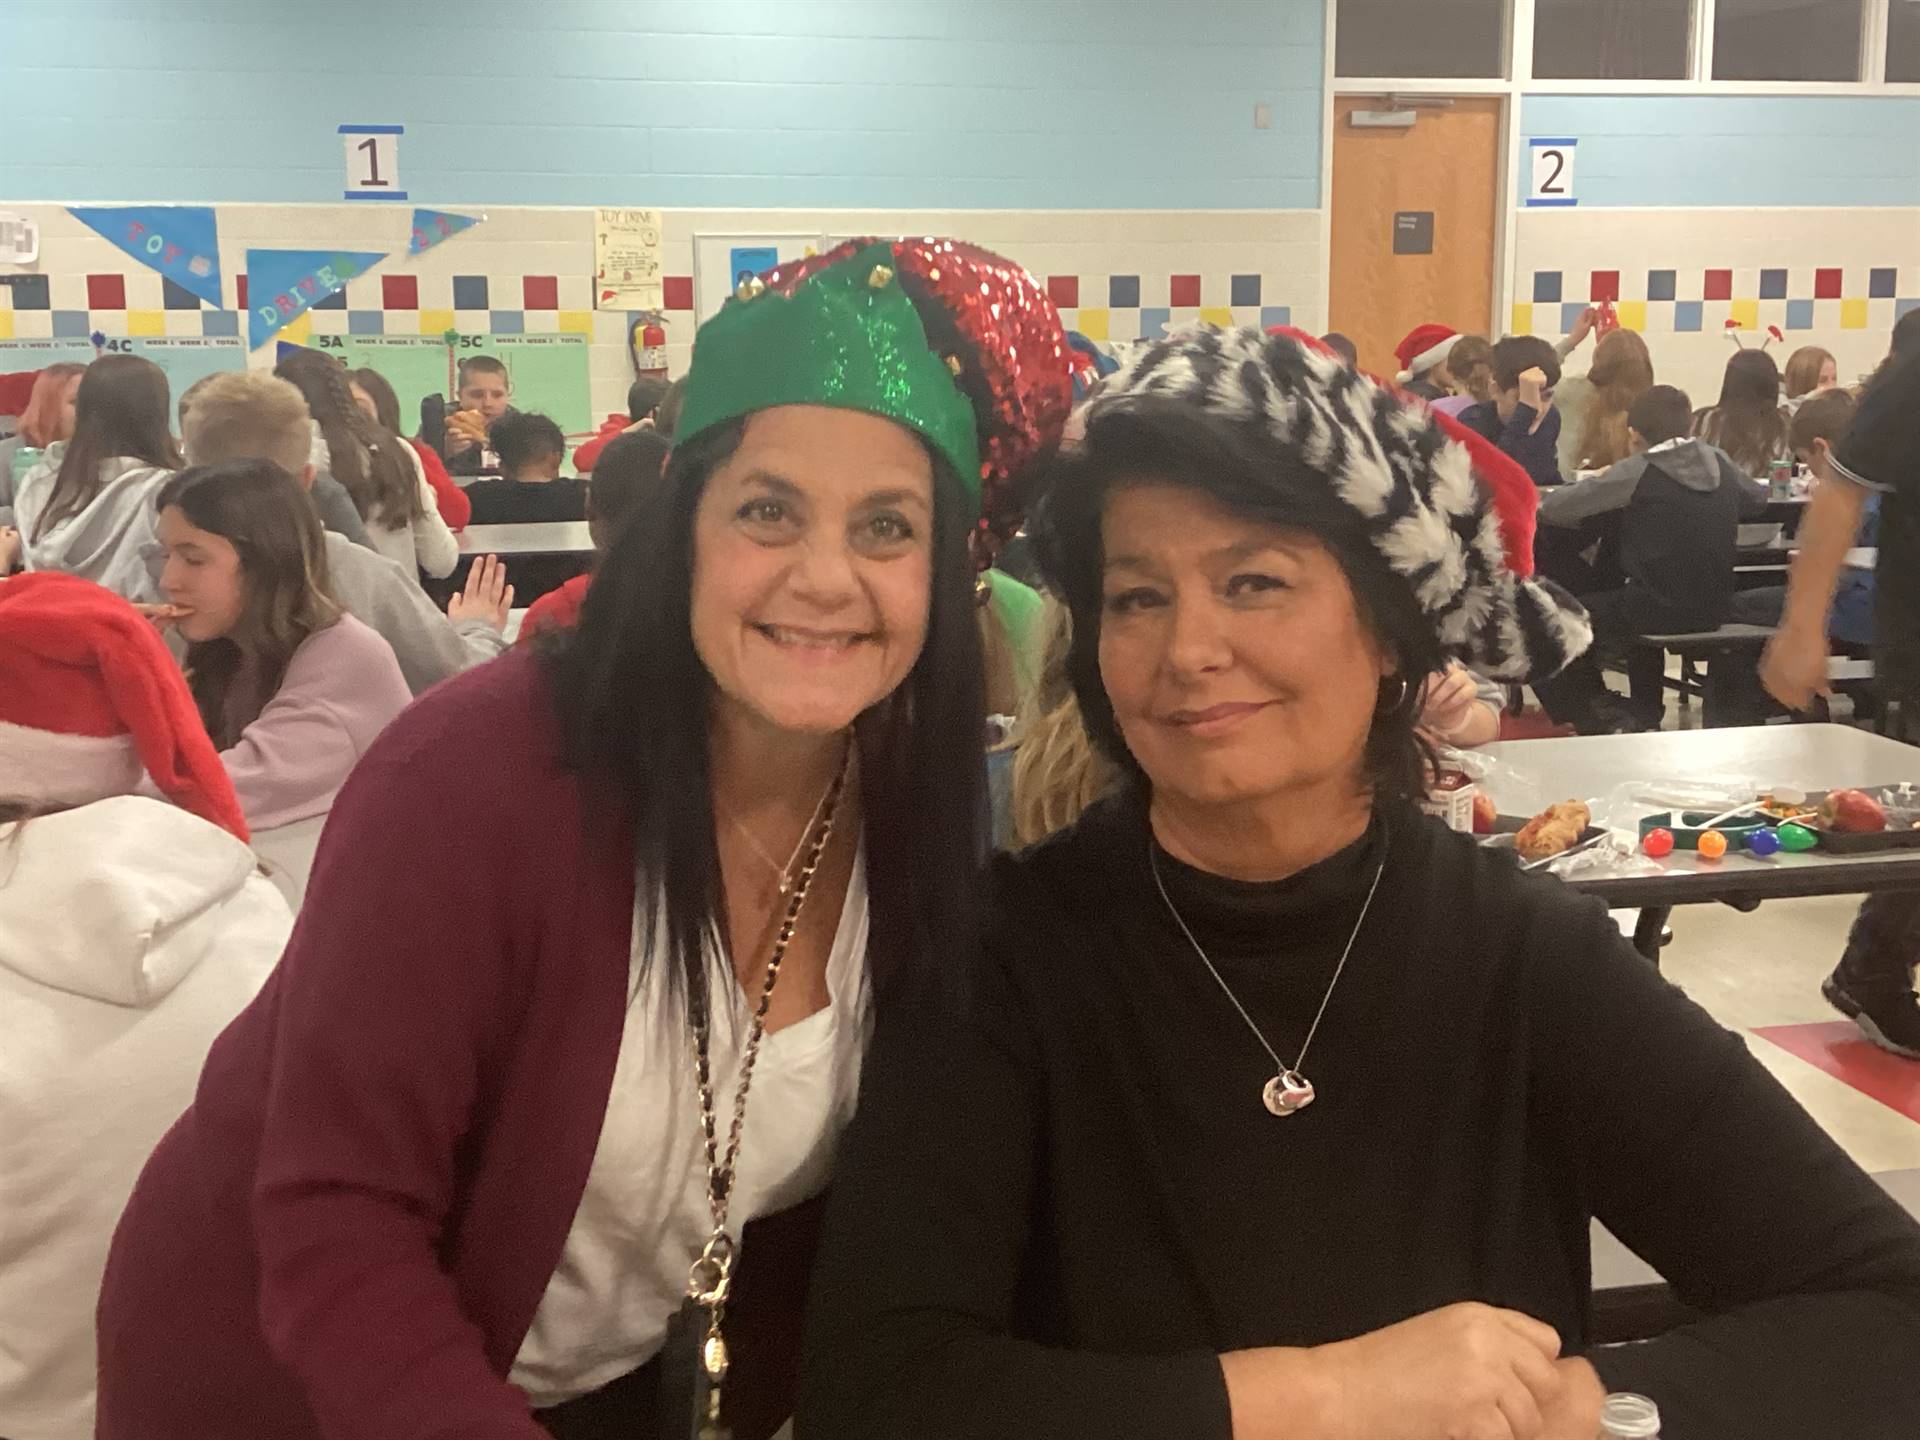 Two SAES staff members in holiday hats